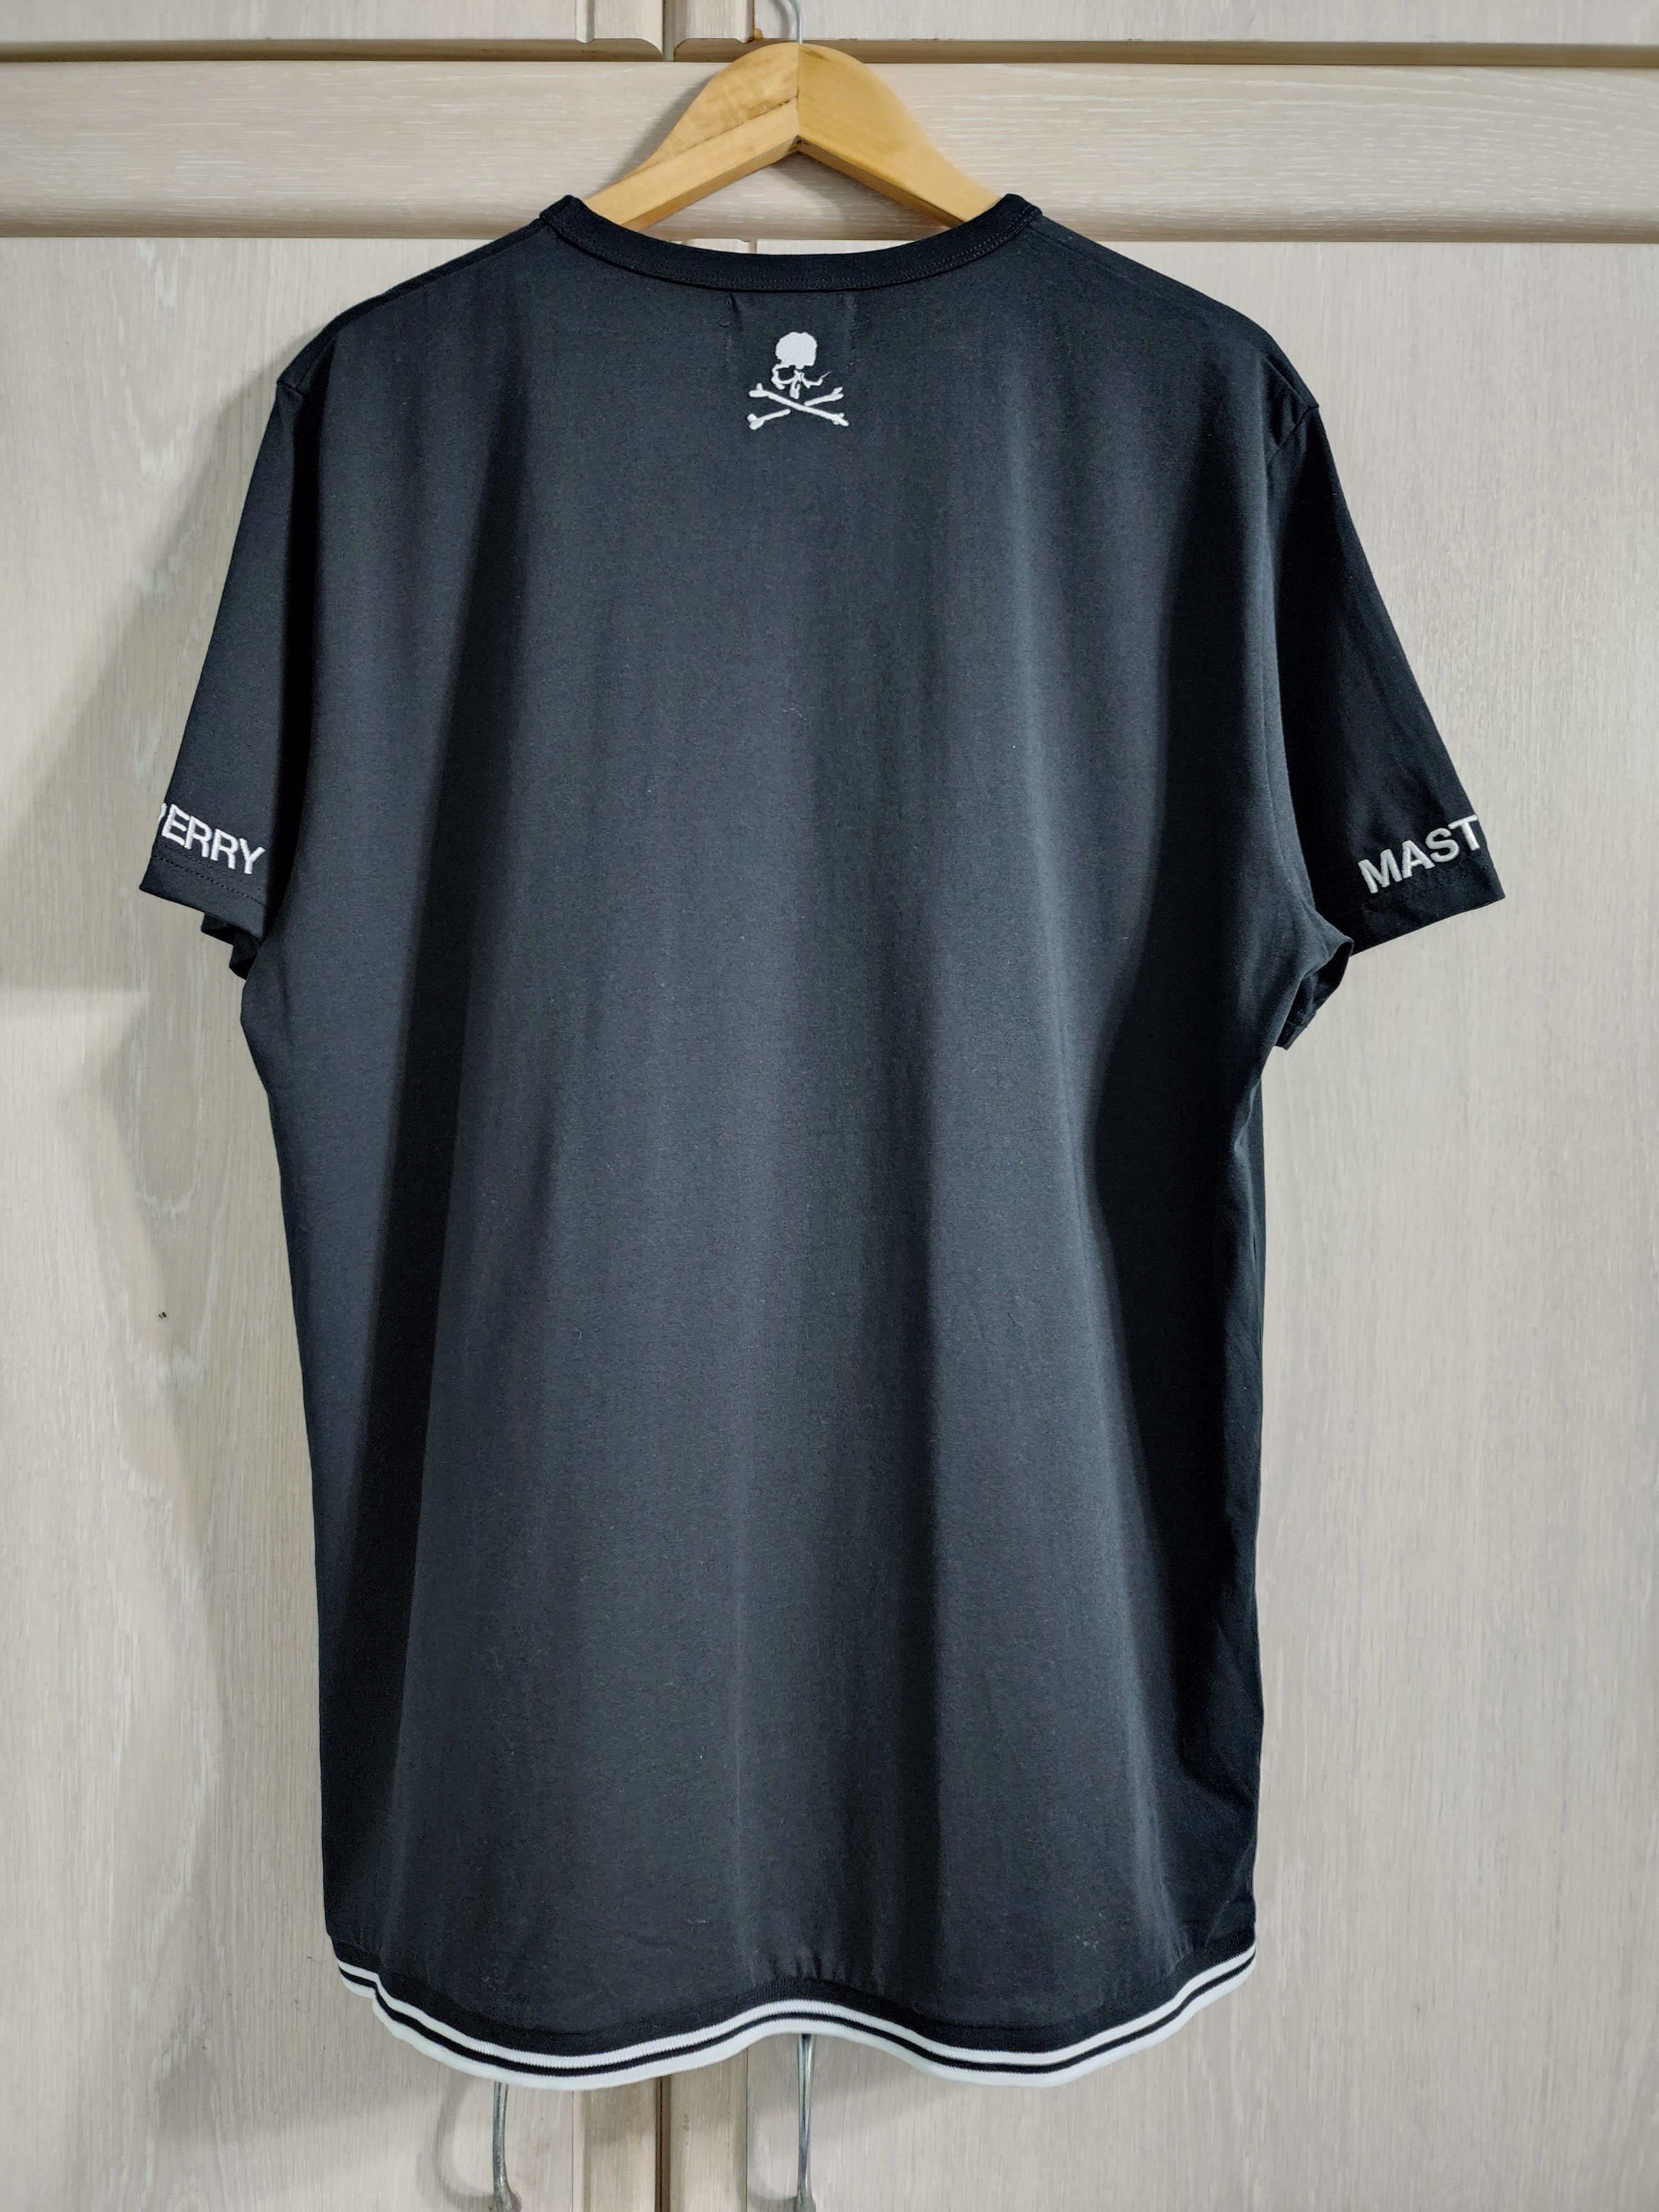 Fred Perry END. x Mastermind World x Fred Perry T-shirt | Grailed